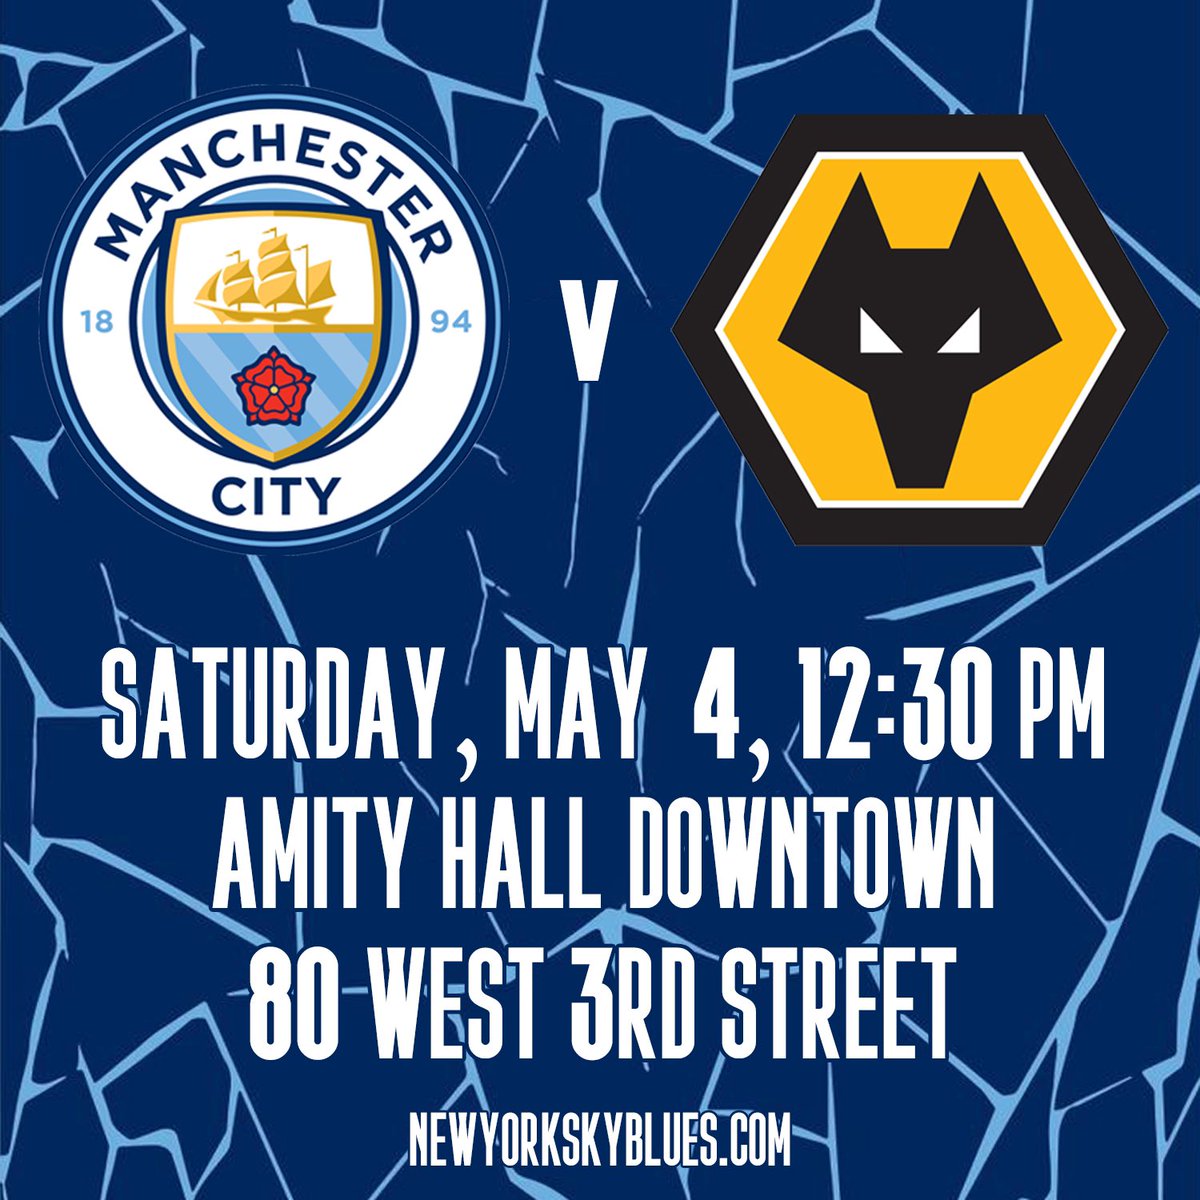 It’s a lunchtime kickoff at @amityhallnyc this Saturday as City faces Wolves at home… join us at 12:30pm for all the action! #CmonCity